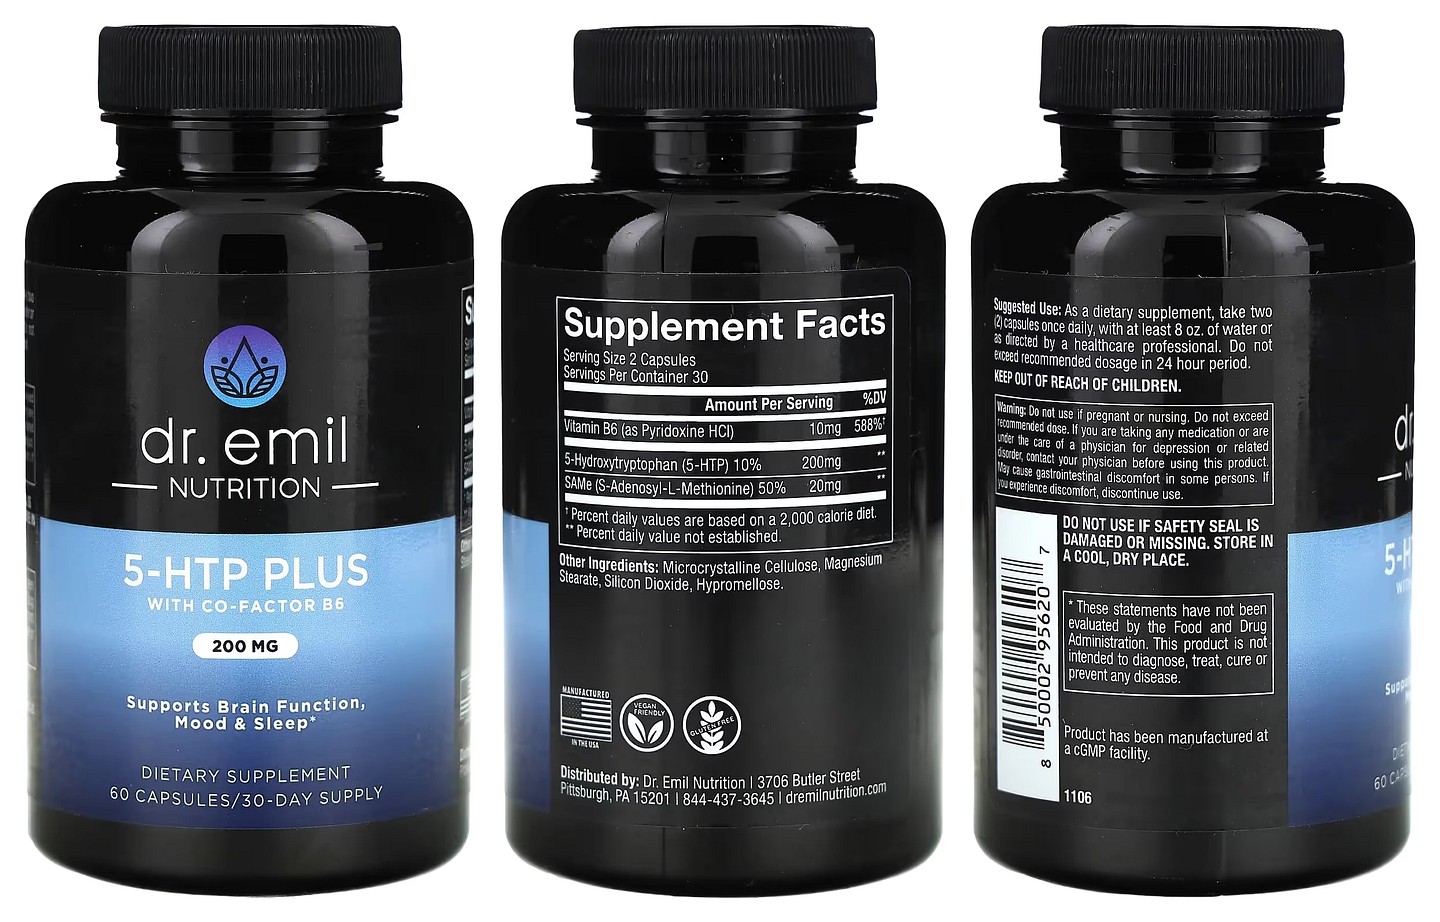 Dr. Emil Nutrition, 5-HTP Plus with Co-Factor B6 packaging